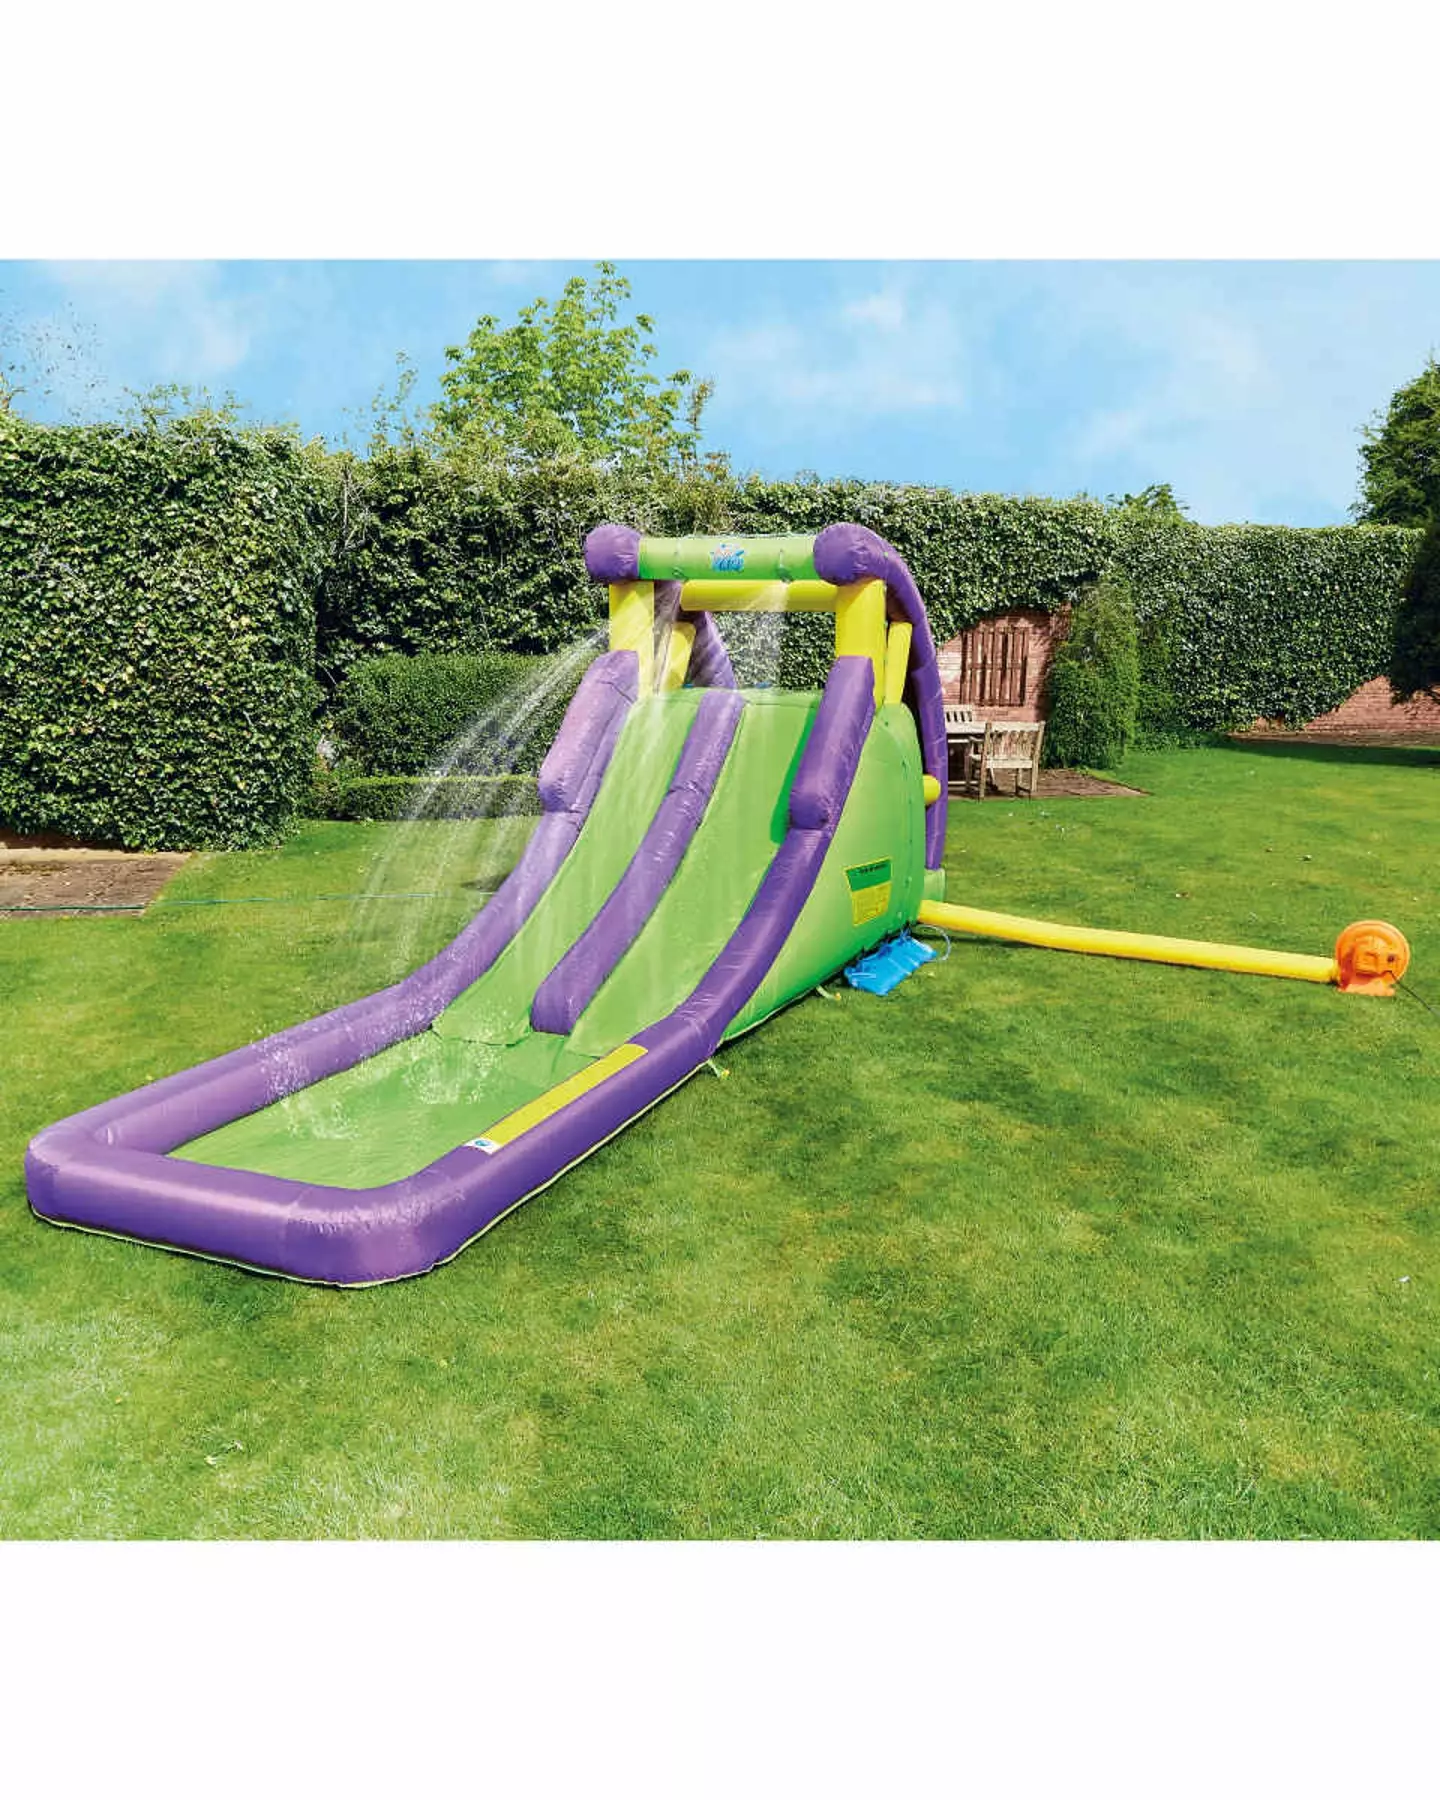 You can recreate the waterpark in your own back garden (